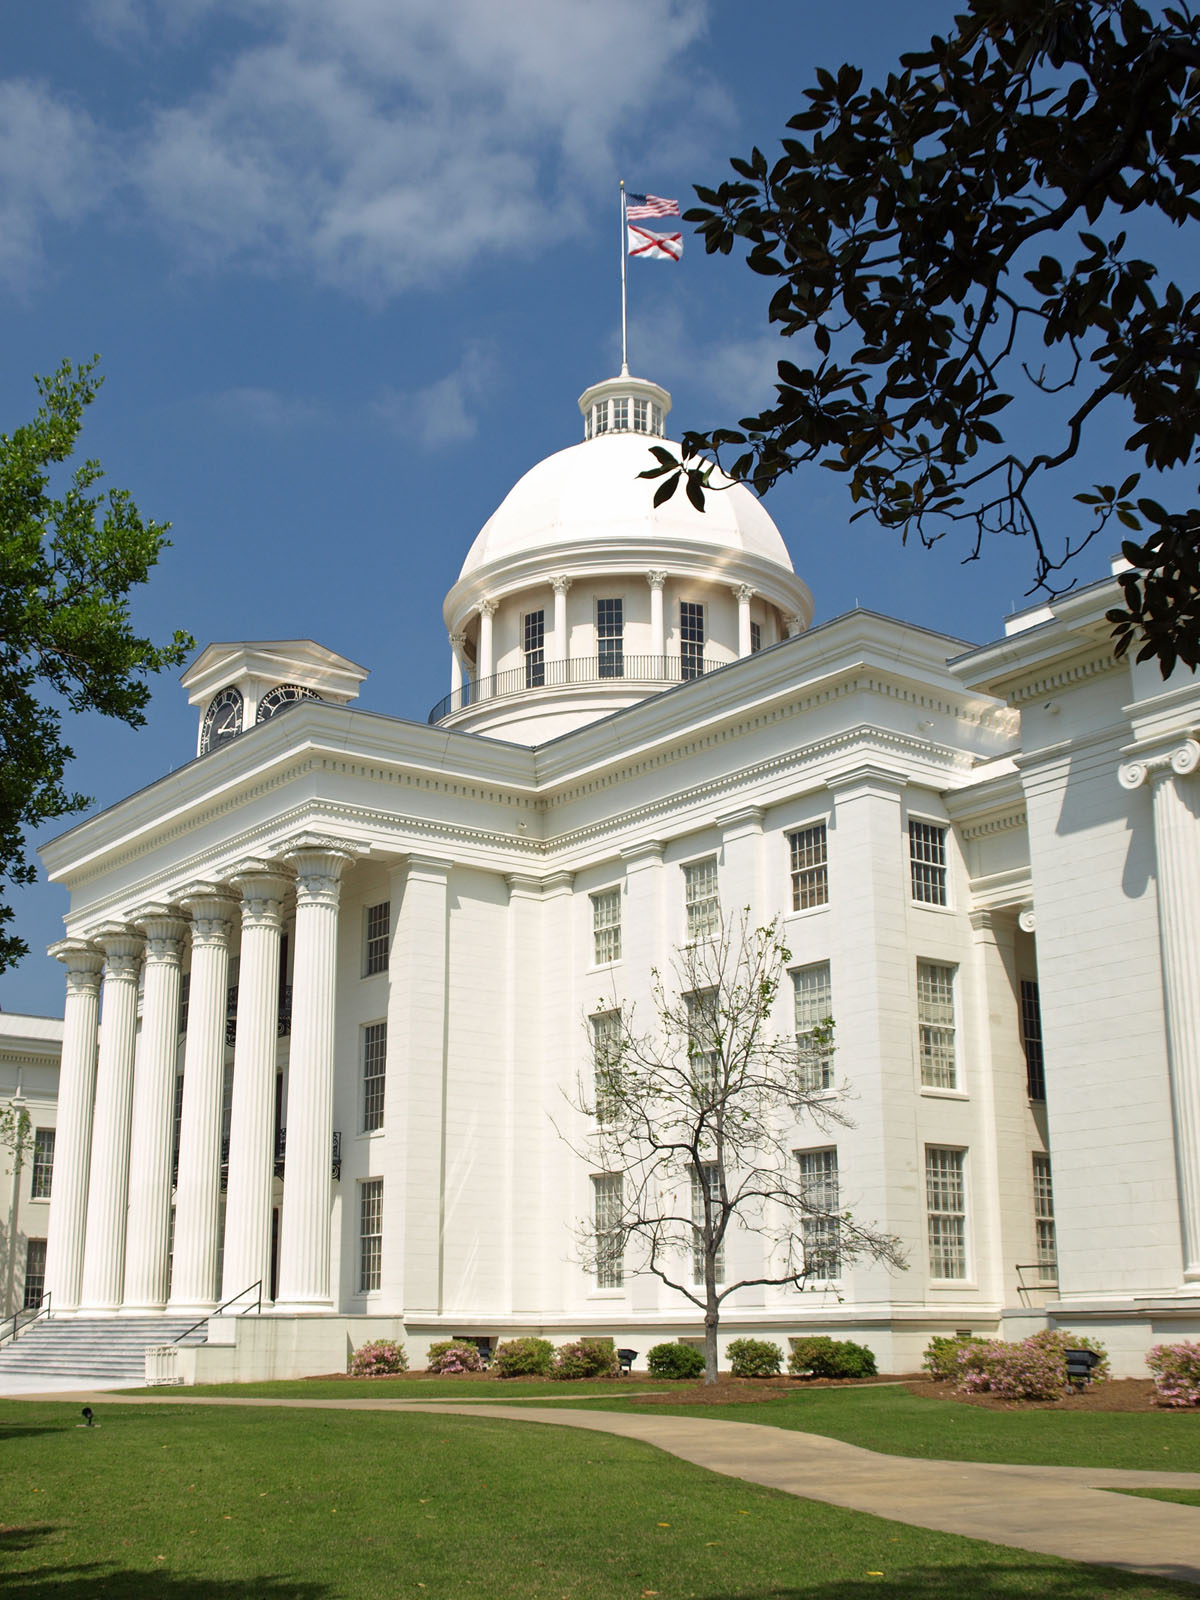 The Alabama capitol building in Montgomery